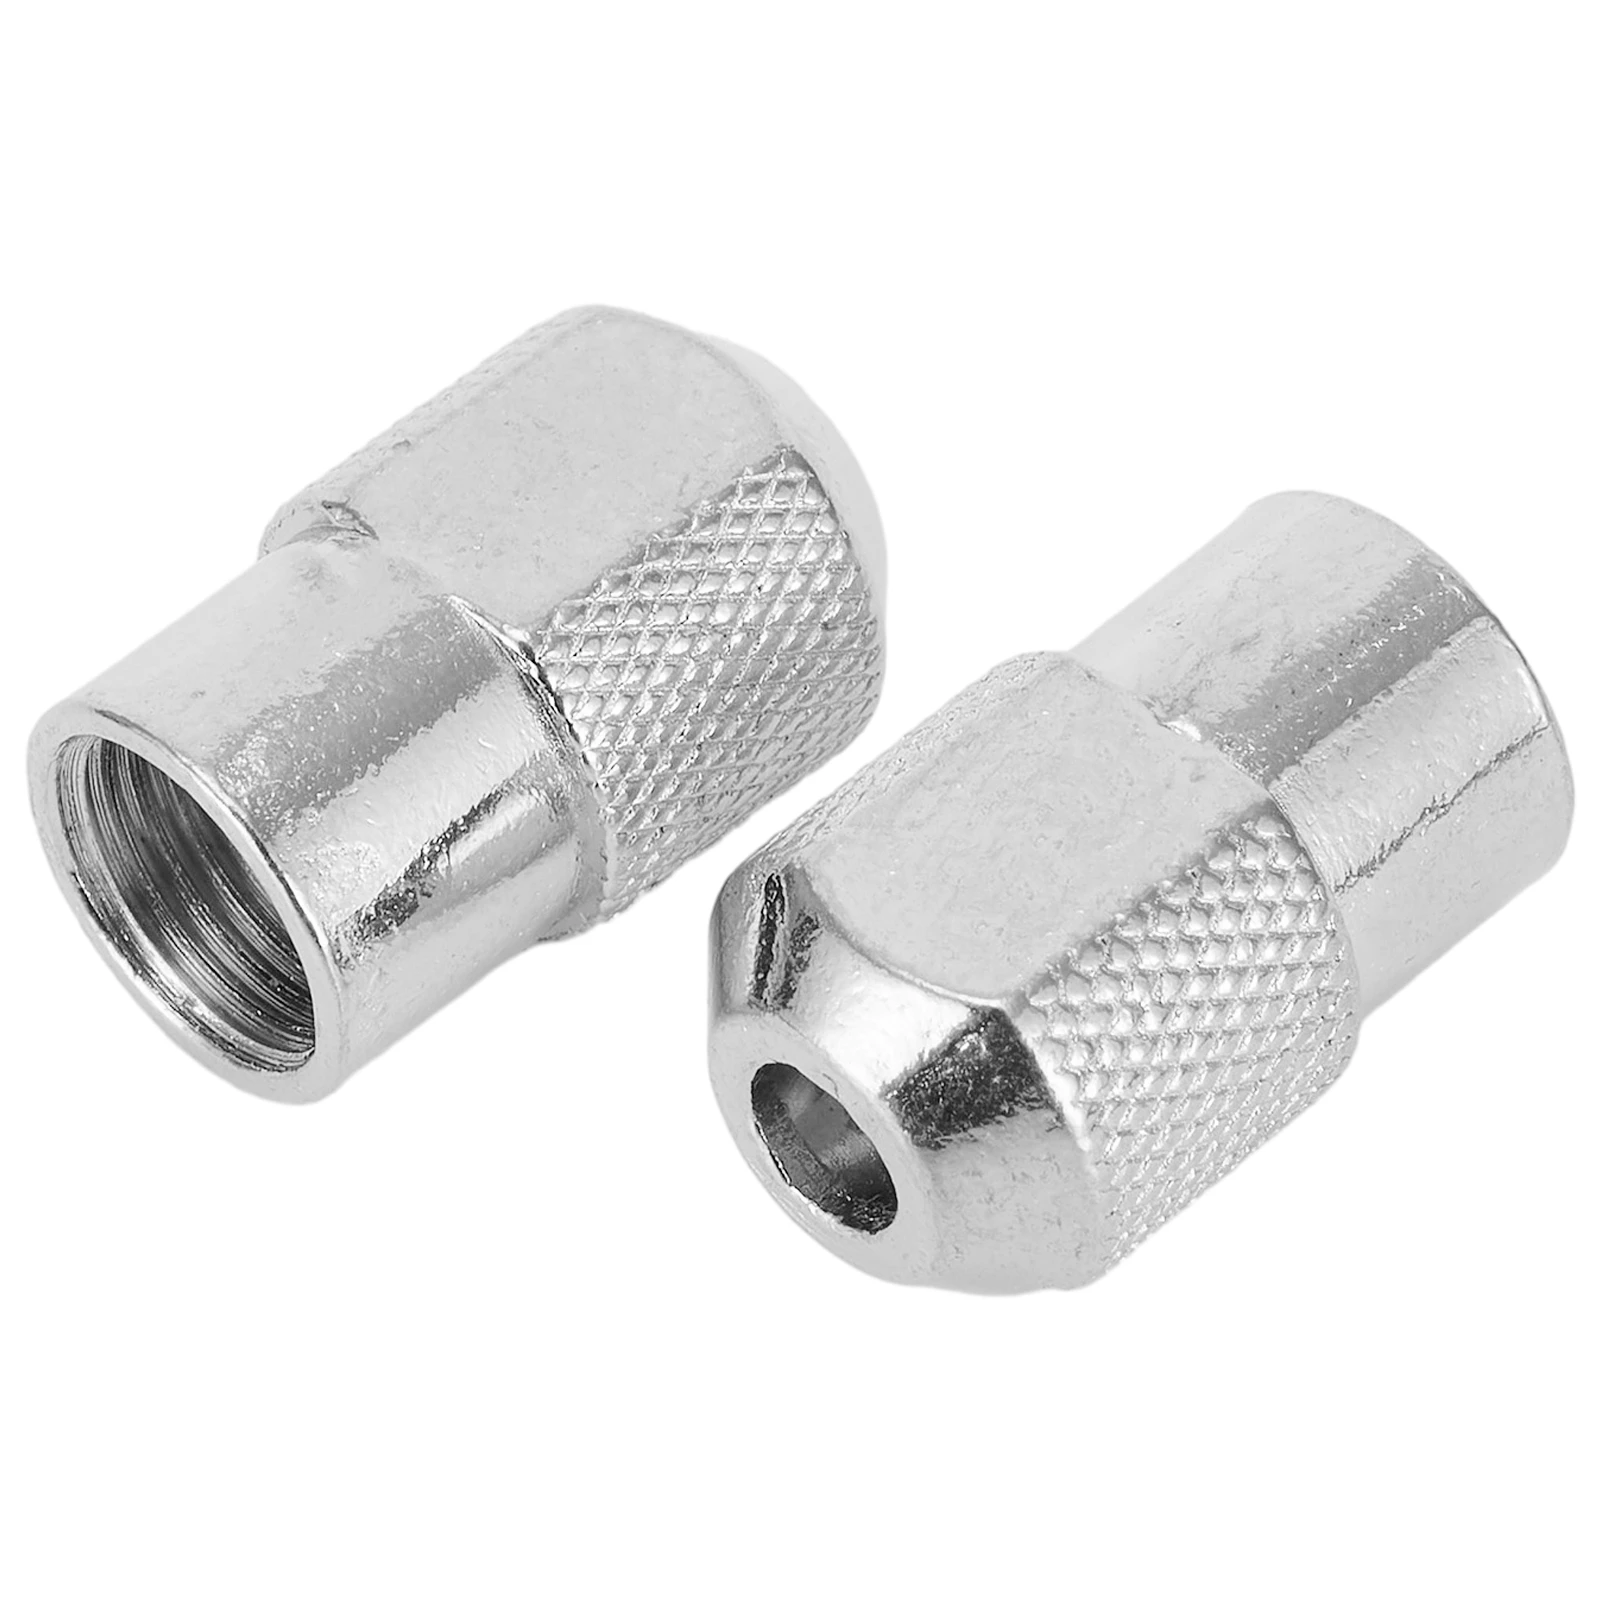 5pcs M8X0.75mm Drill Chuck Electric Mill Shaft Screw Cap Nut Collet For Electric Mill Grinder Shaft Rotary Tool Power Tools Acce